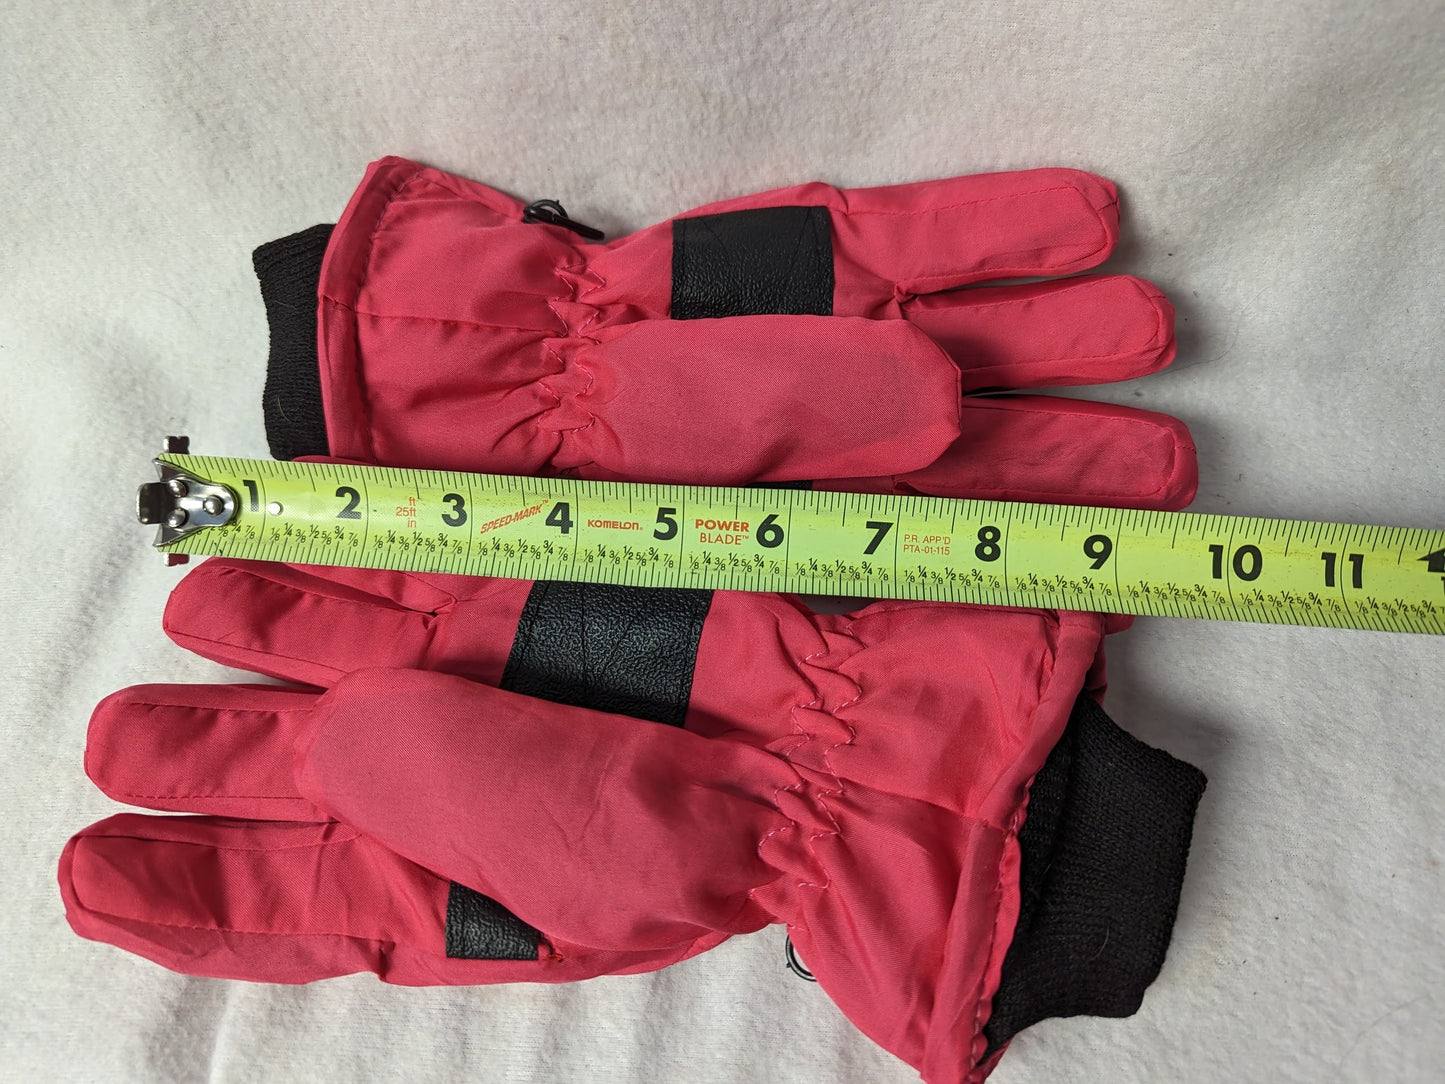 Women's Insulated Winter Gloves Size Women Large Color Pink Condition Used